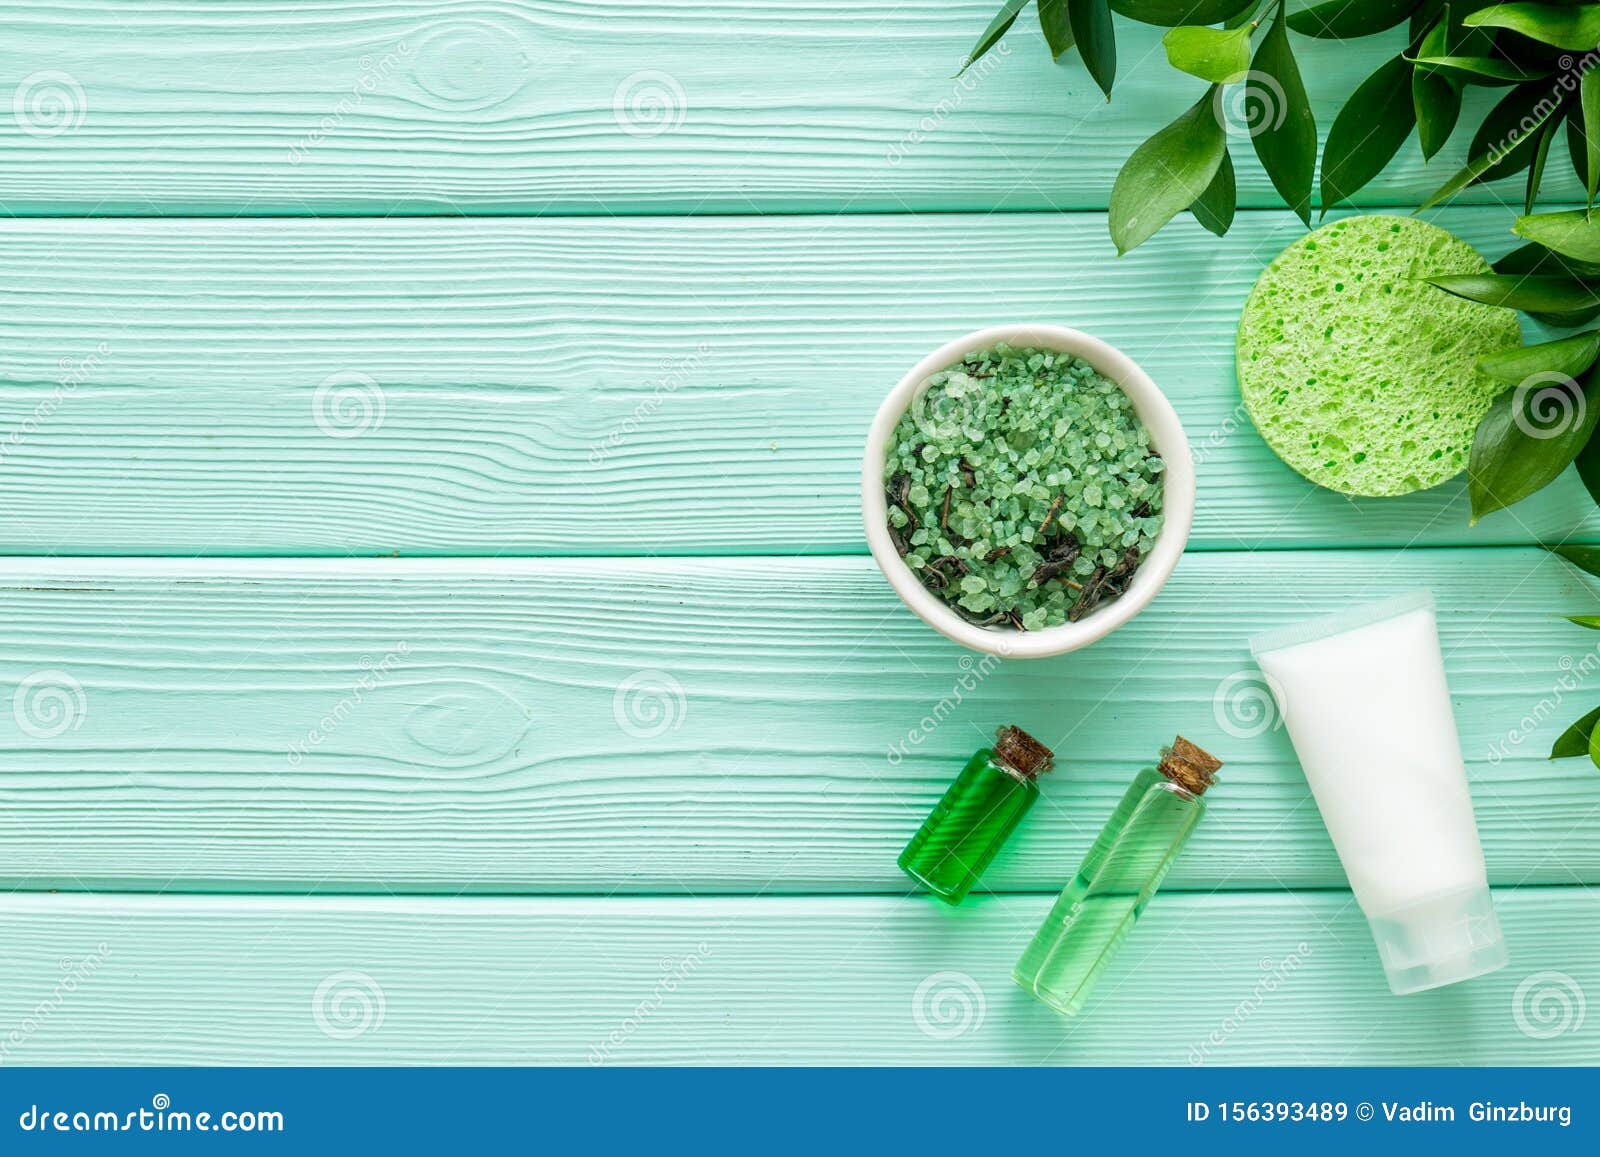 Organic Cosmetic with Herbs on Mint Green Wooden Background Top View Mock  Up Stock Image - Image of body, fresh: 156393489